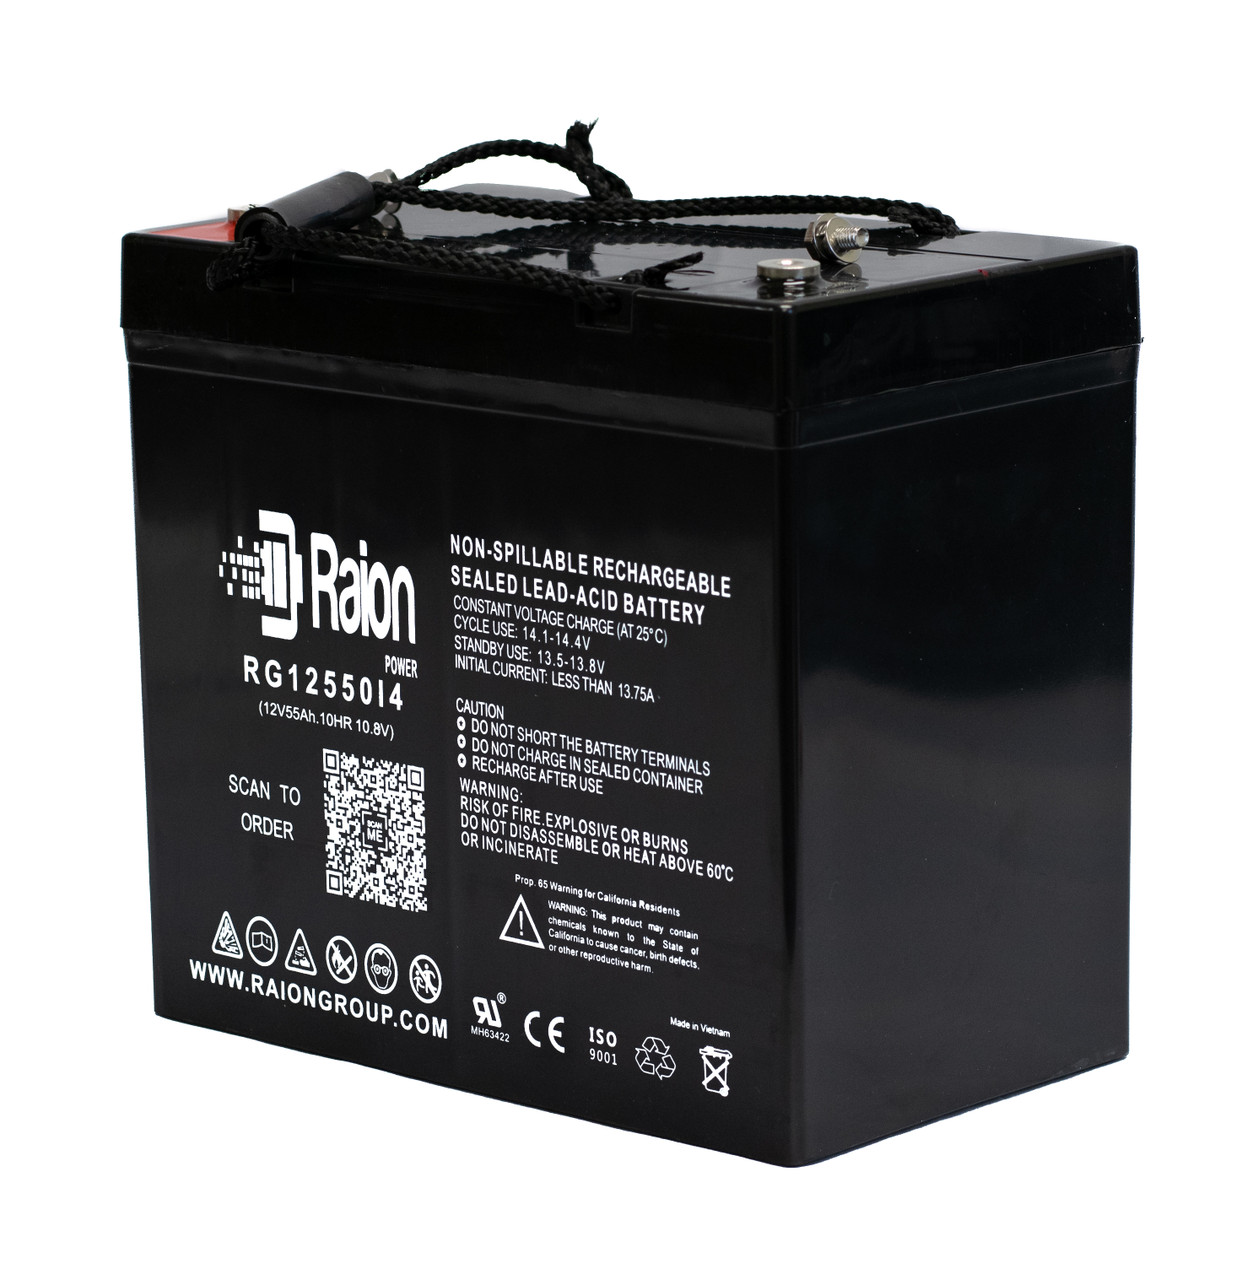 Raion Power 12V 55Ah 22NF Mobility Scooter Battery Replacement for Merits Health Products P184